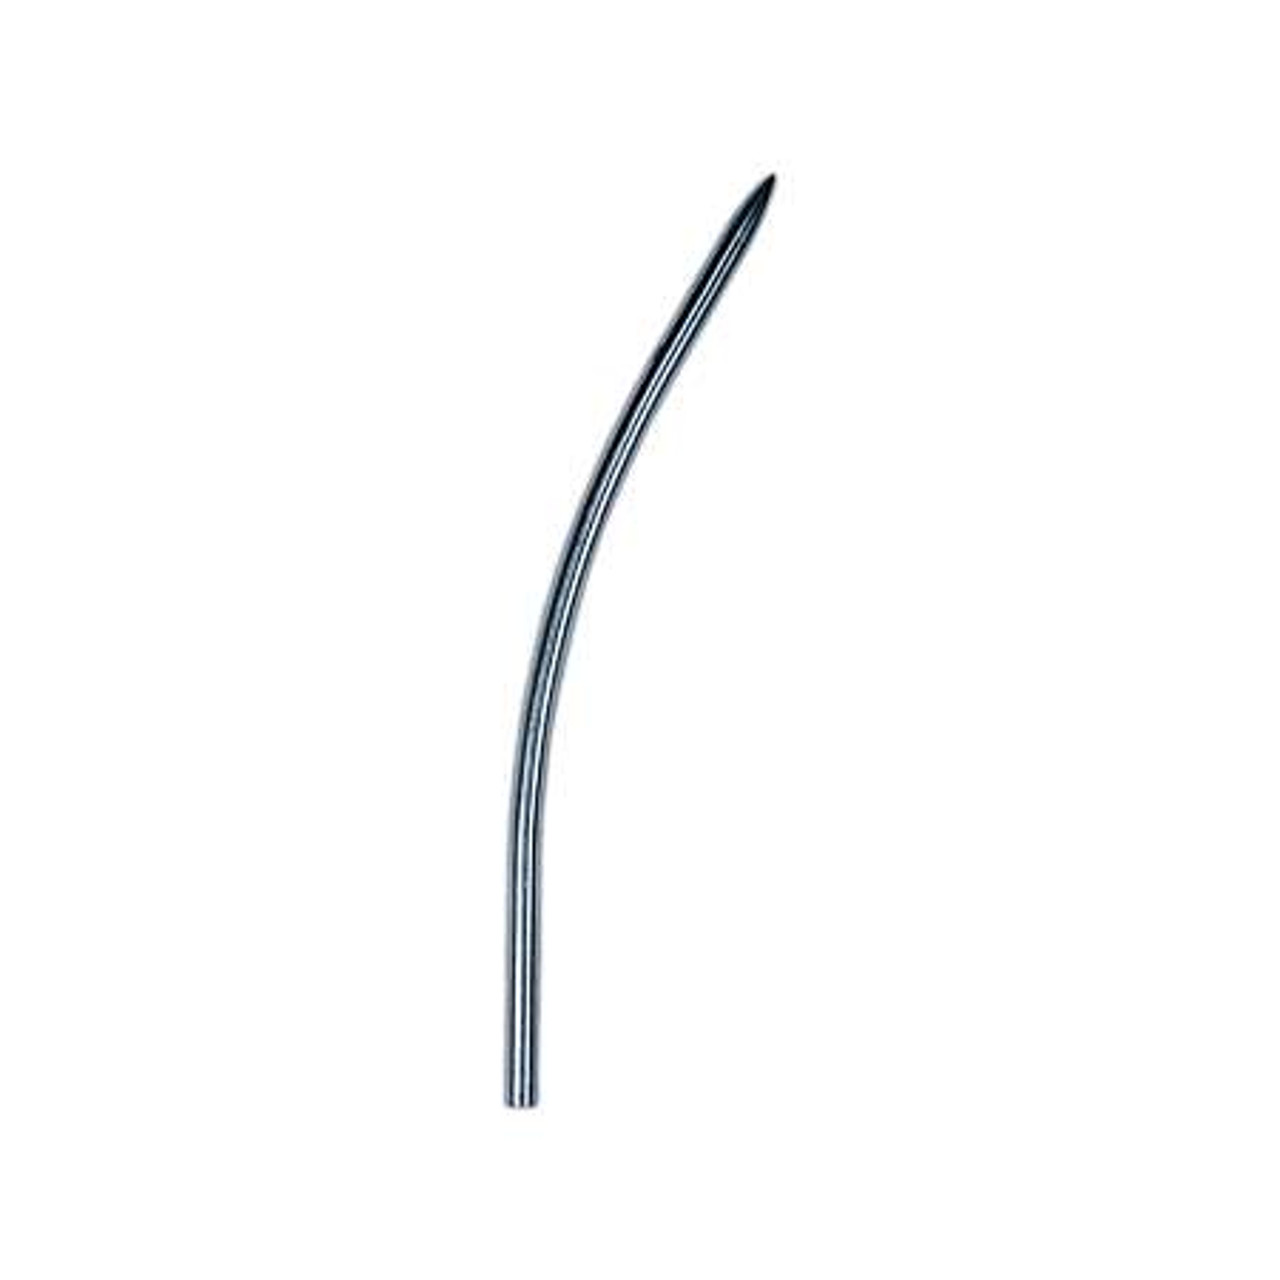 Curved Paracord Stitching Needle - 6